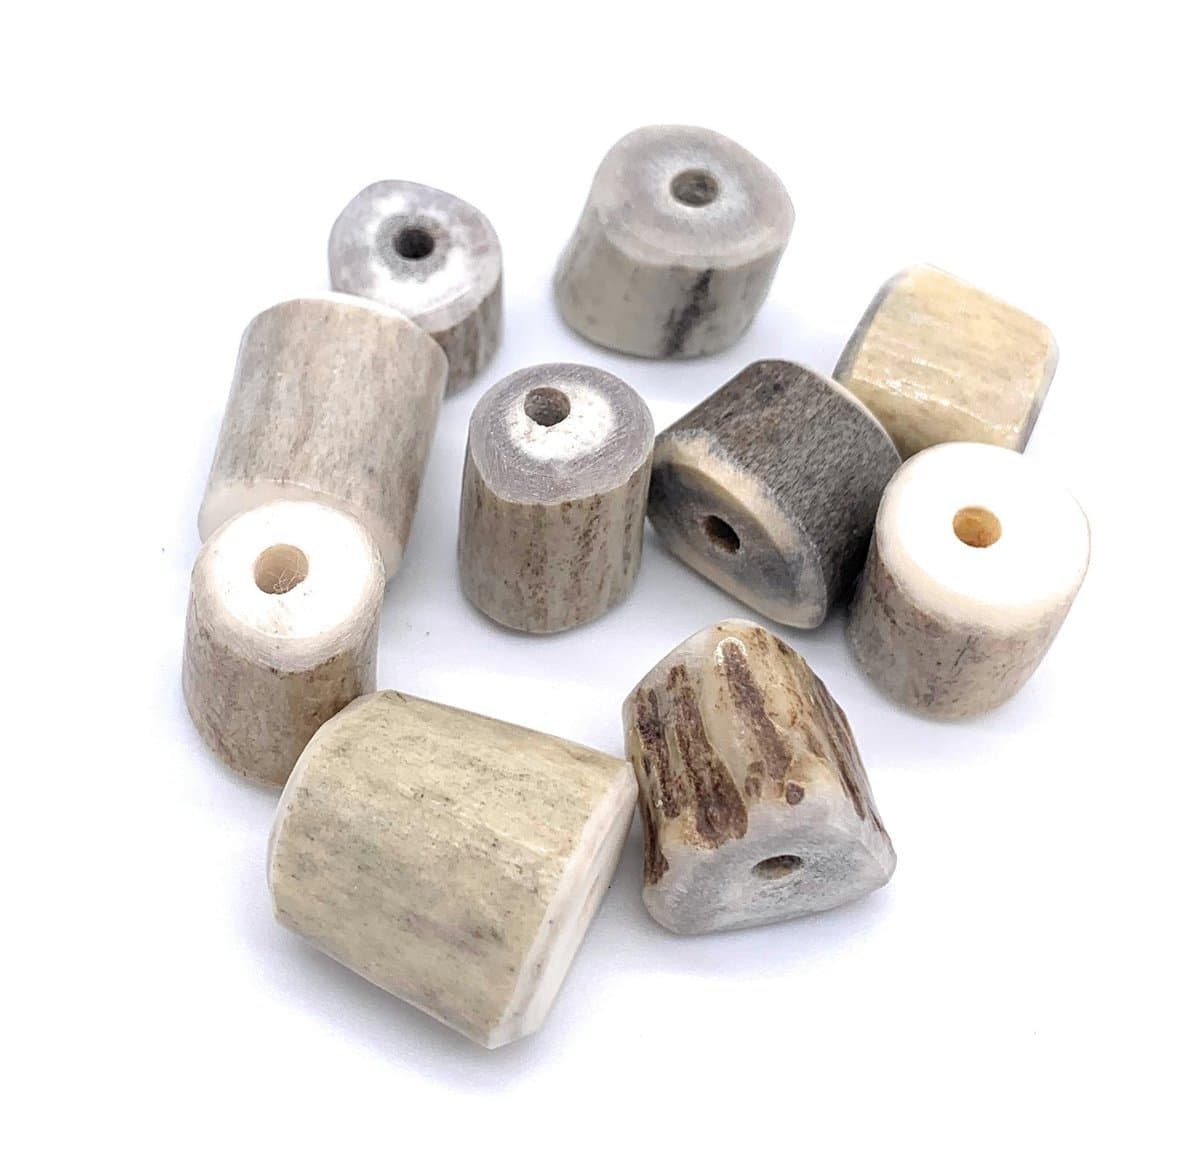 Antler Beads 10 Count - Antler For Crafts - Antler For Jewelry